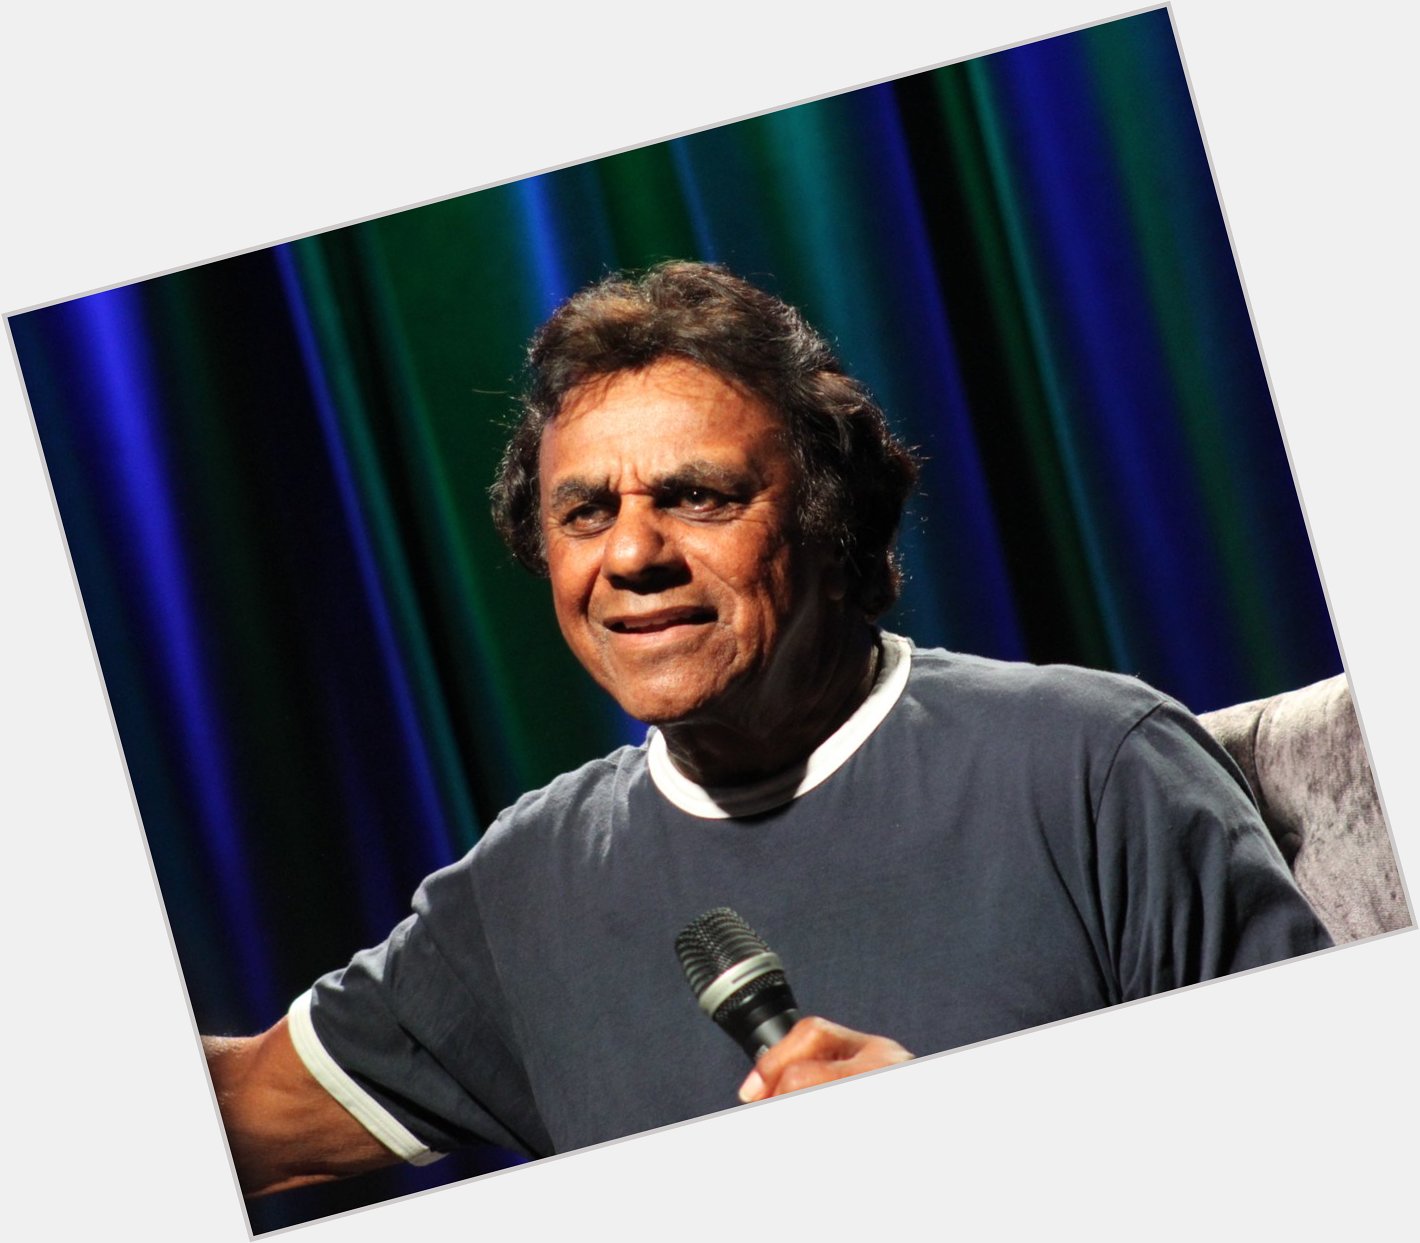 HaPpY BirThDaY!! to the smooth vocals and 4 times GRAMMY Winner Johnny Mathis 